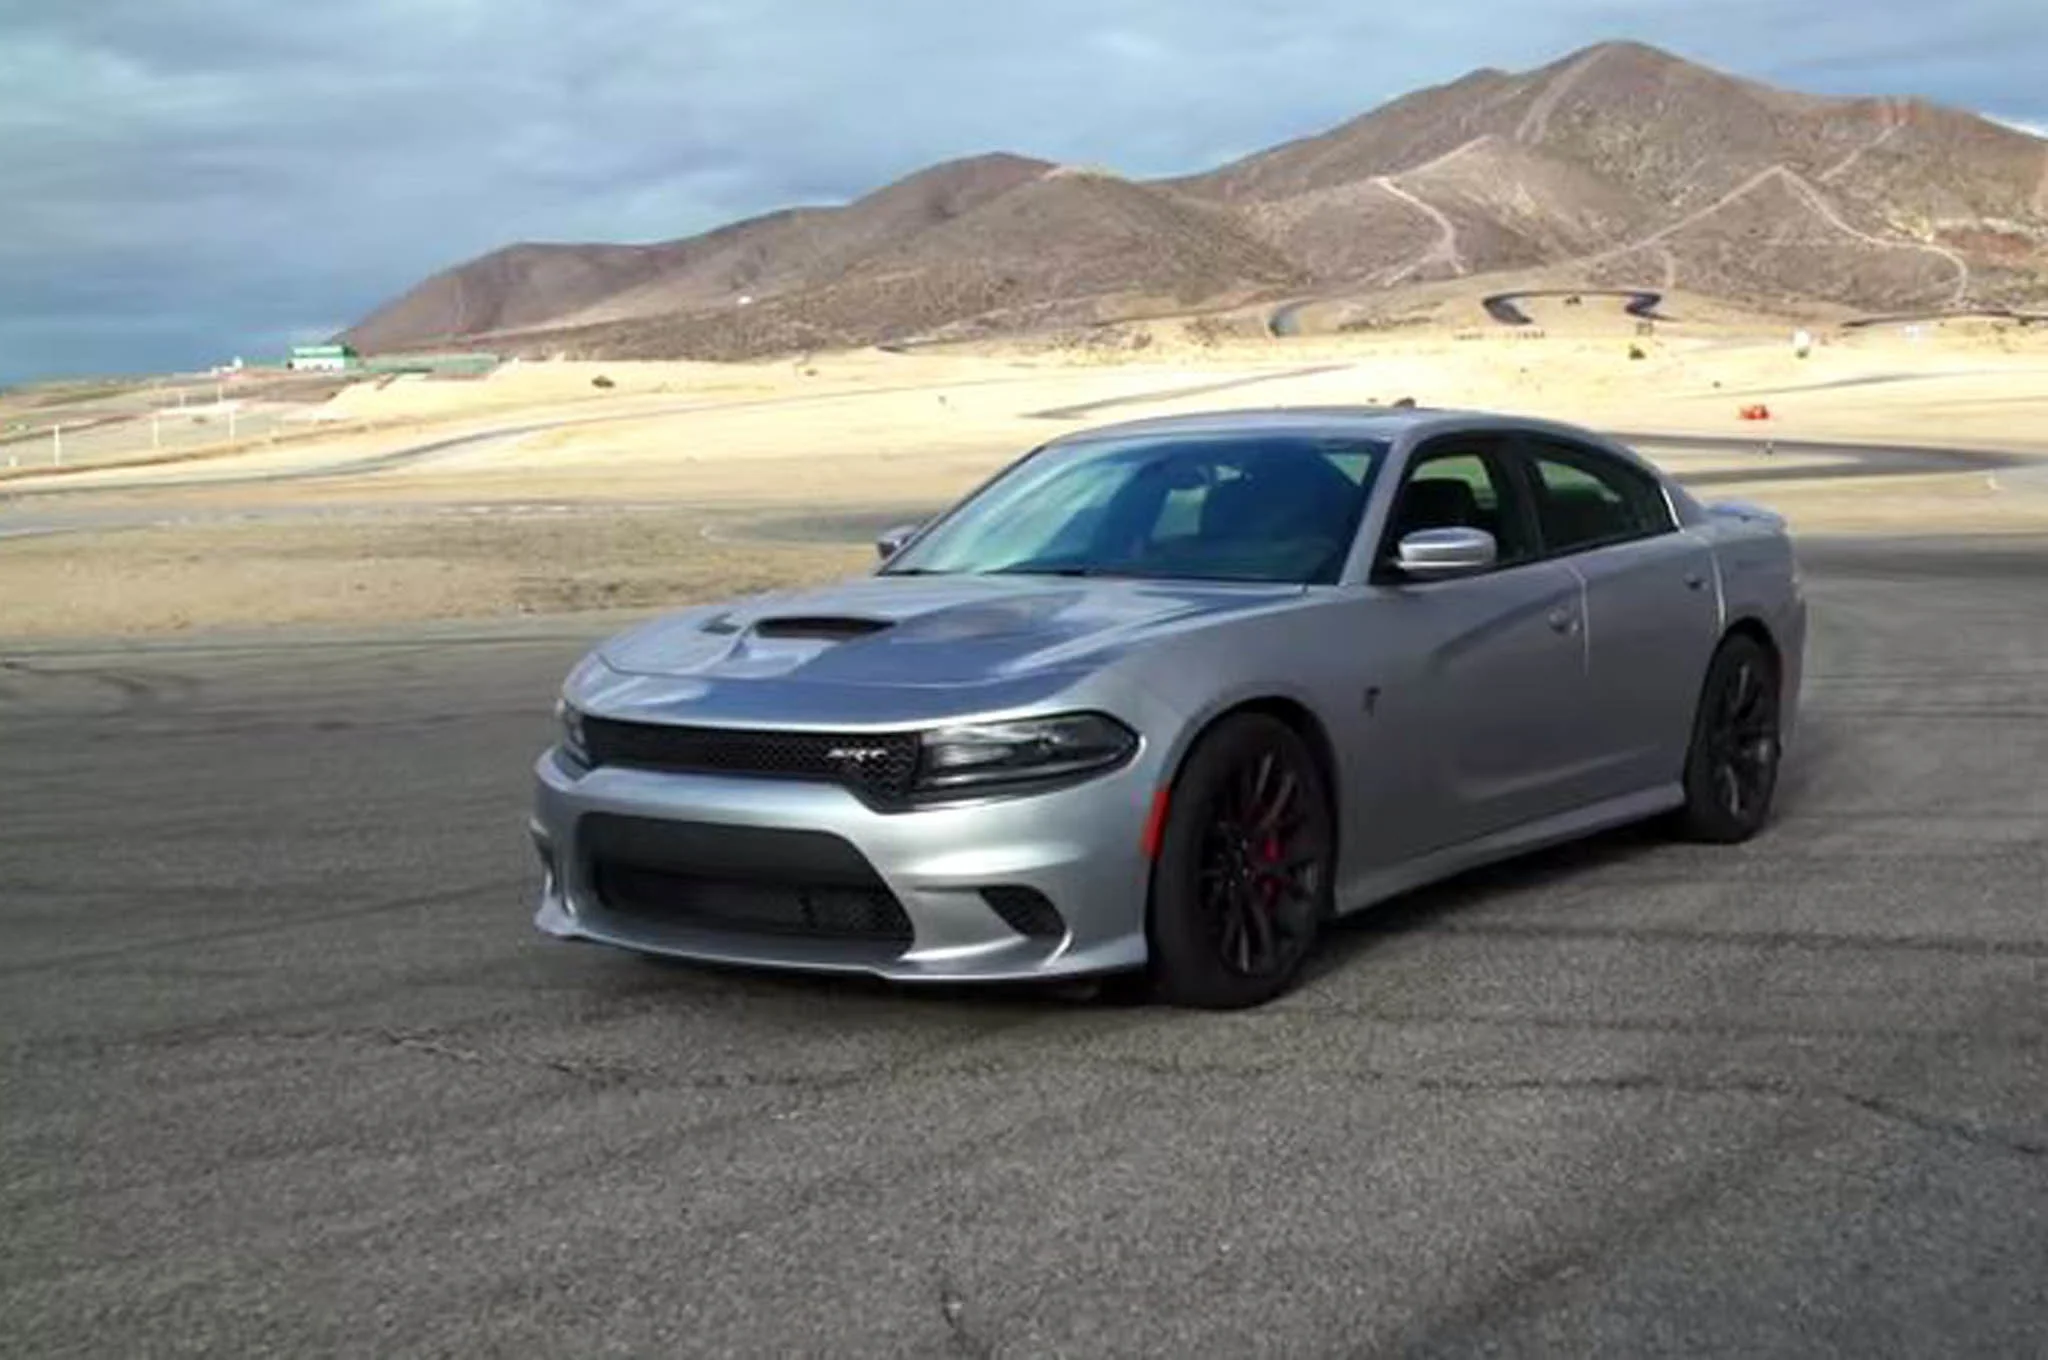 Am I The Only One Who Prefers The Charger Hellcat To The Challenger Hellcat Damn It Looks Good In Dark Silver